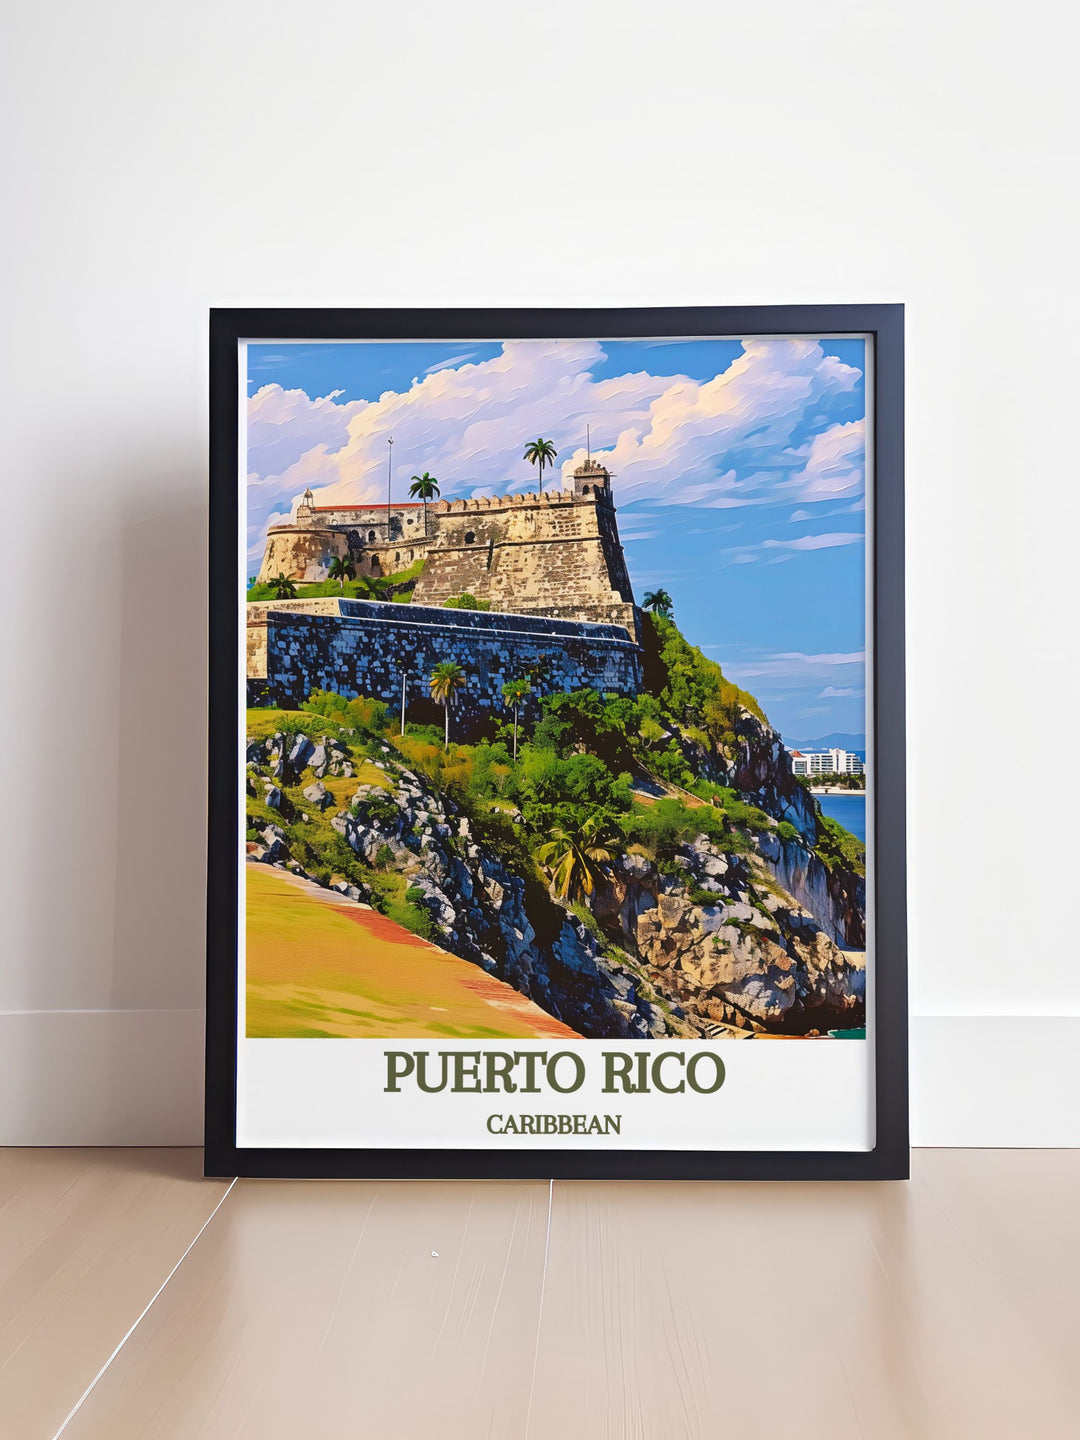 Detailed Arecibo city map poster with the iconic CARIBBEAN, Castillo San Felipe del Morro. Perfect for travel enthusiasts and art collectors. This vintage print offers a unique perspective of Puerto Ricos rich history and stunning landscapes.